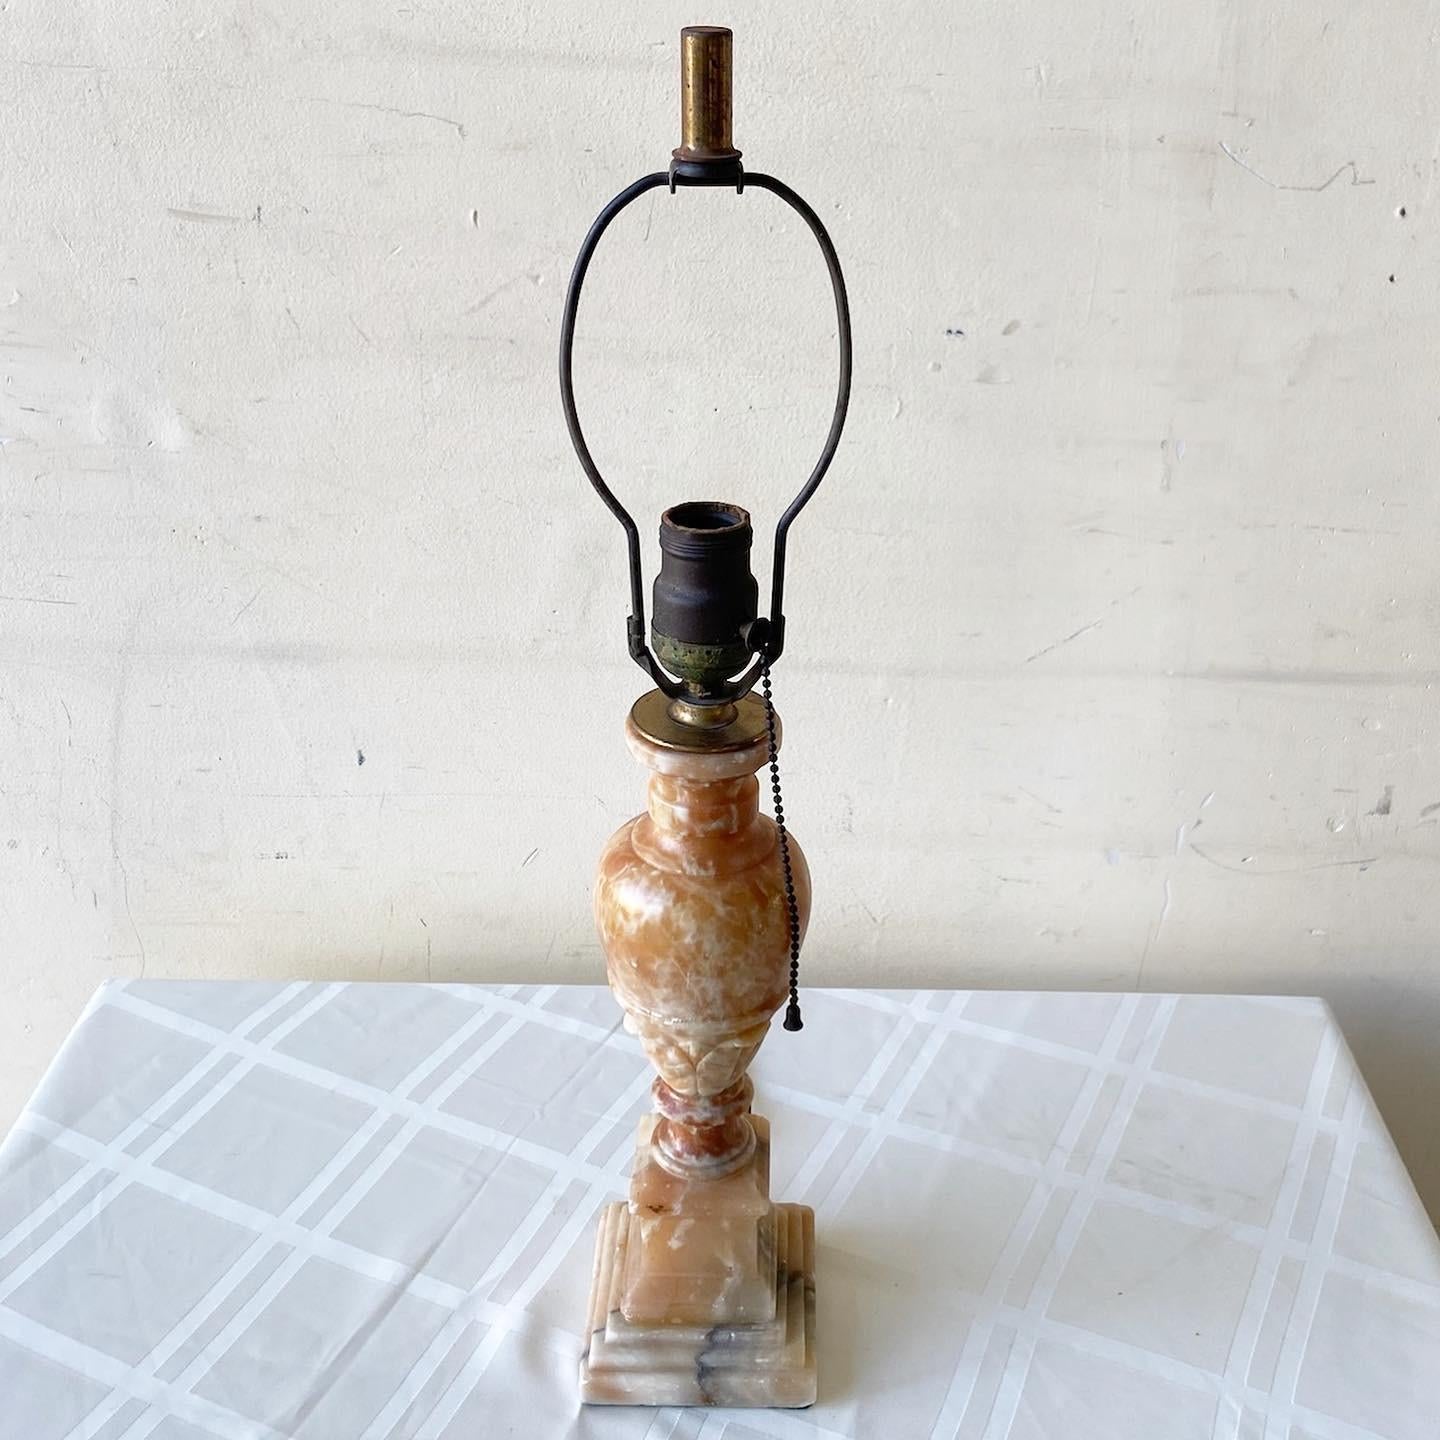 Exceptional vintage brown alabaster table lamp. Features an ornate hand carved and polished design.
 